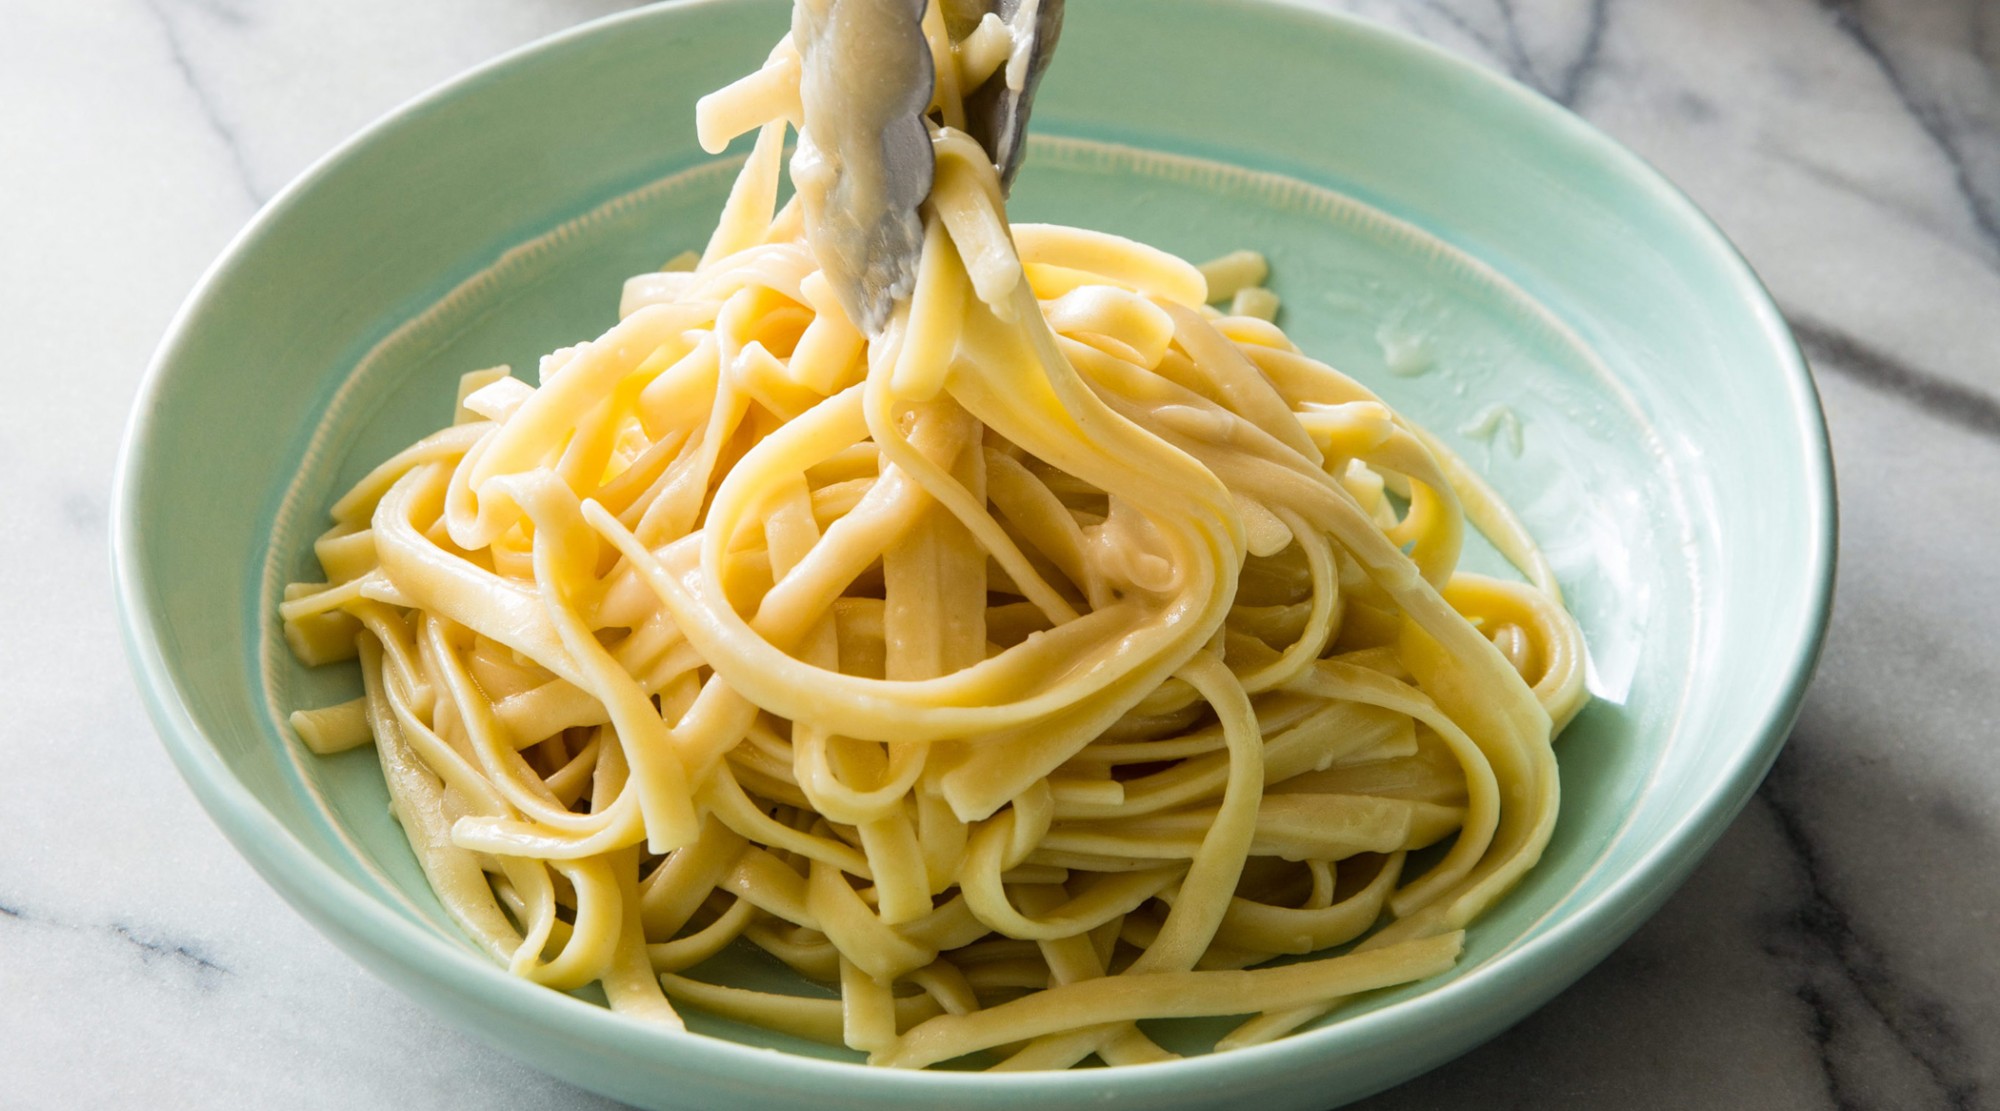 Fettuccine Market to Witness Huge Growth by 2025 | Key Players: Barilla Group, Buitoni, De Cecco